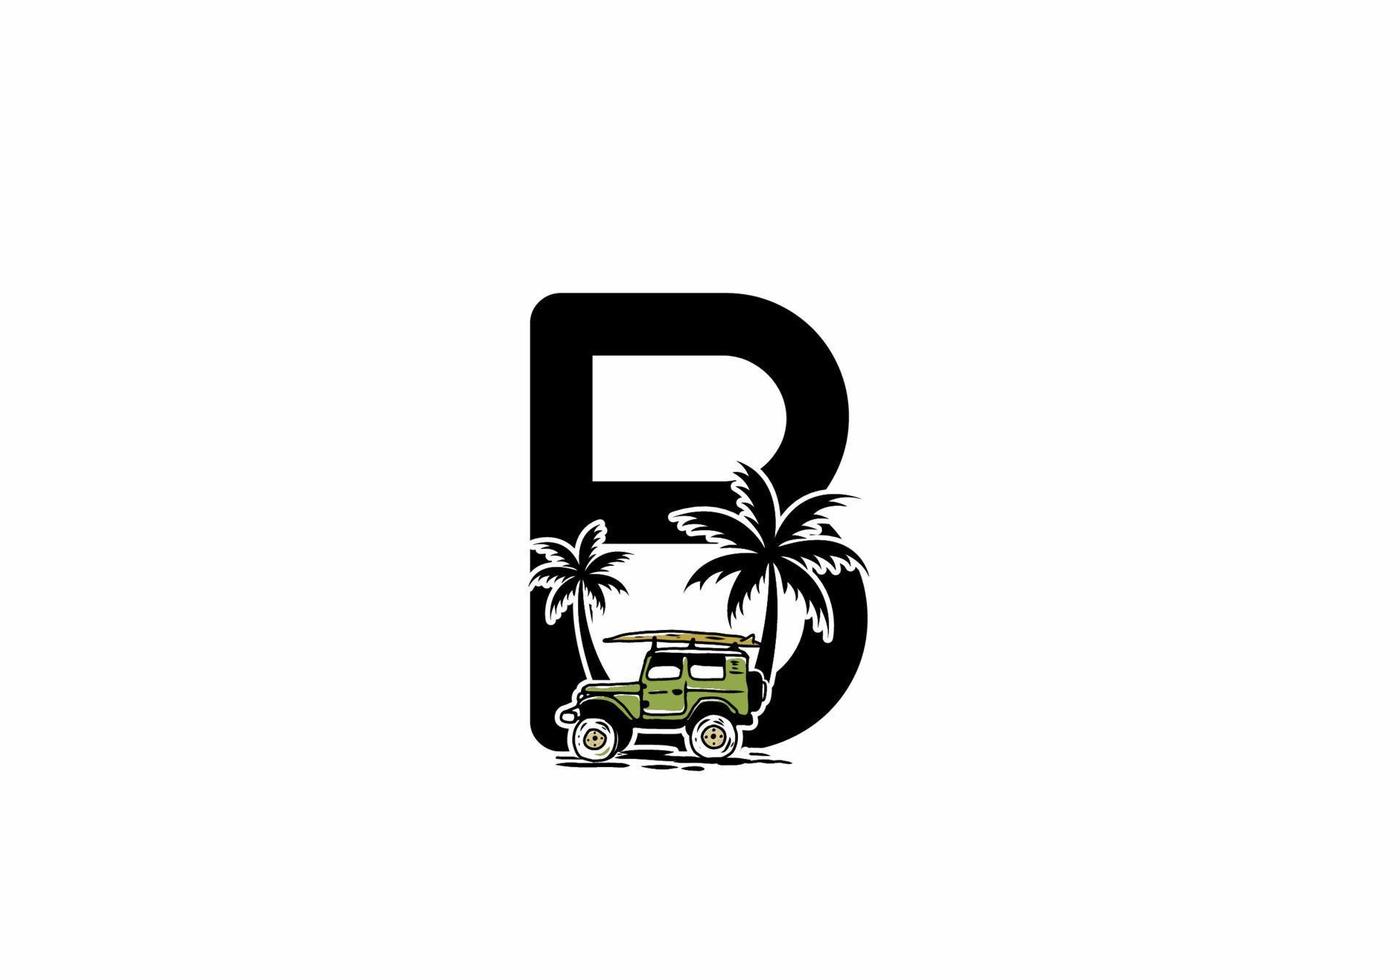 Off road car with B initial letter vector